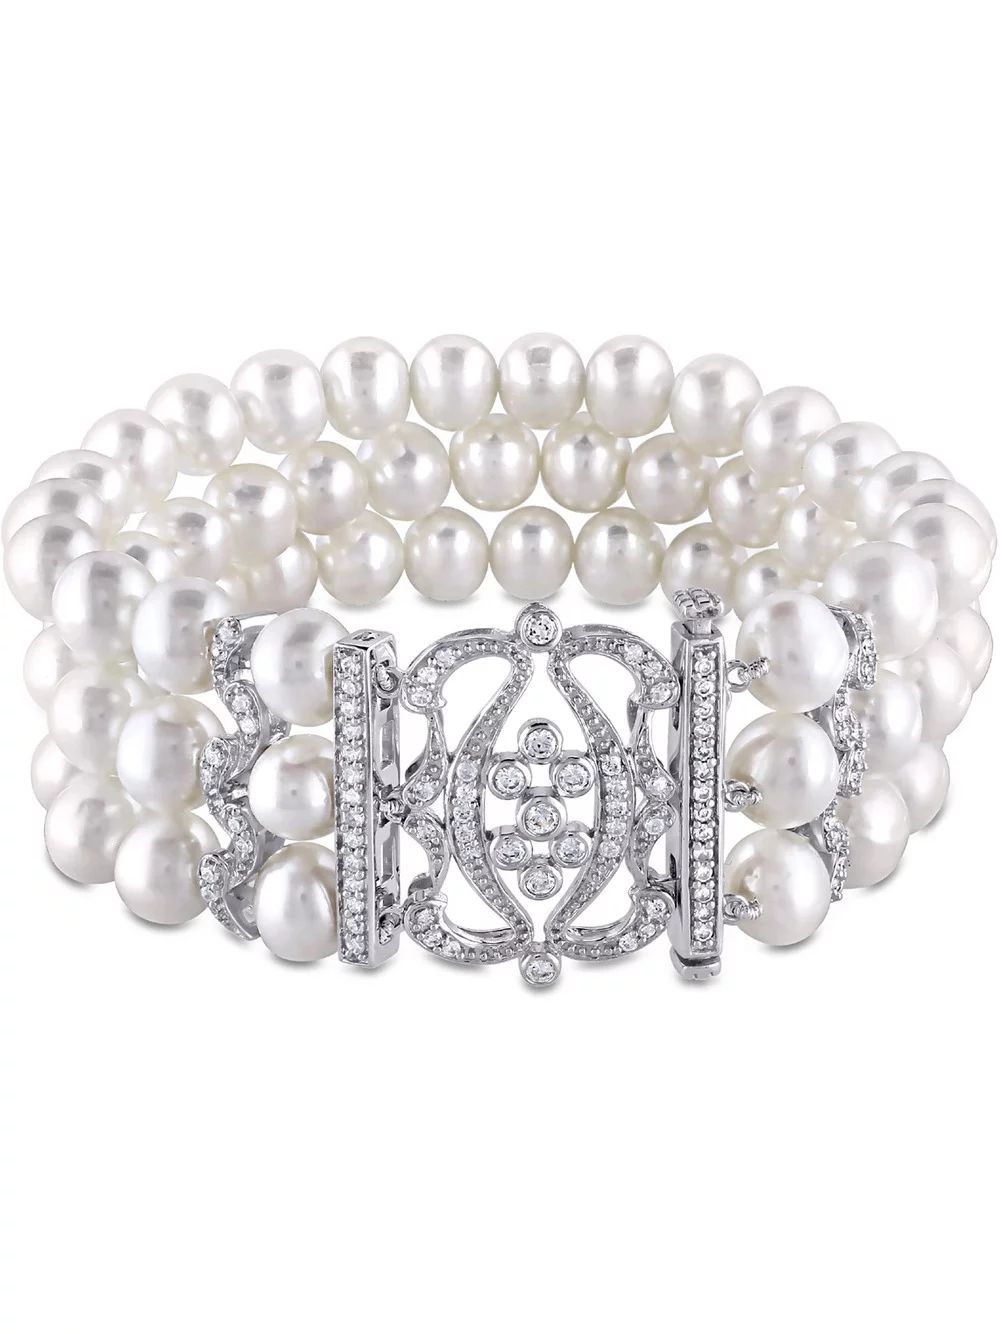 White Freshwater Cultured Pearl 6.5-7mm Bracelet with Cubic Zirconia (CZ) In Sterling Silver | Walmart (US)